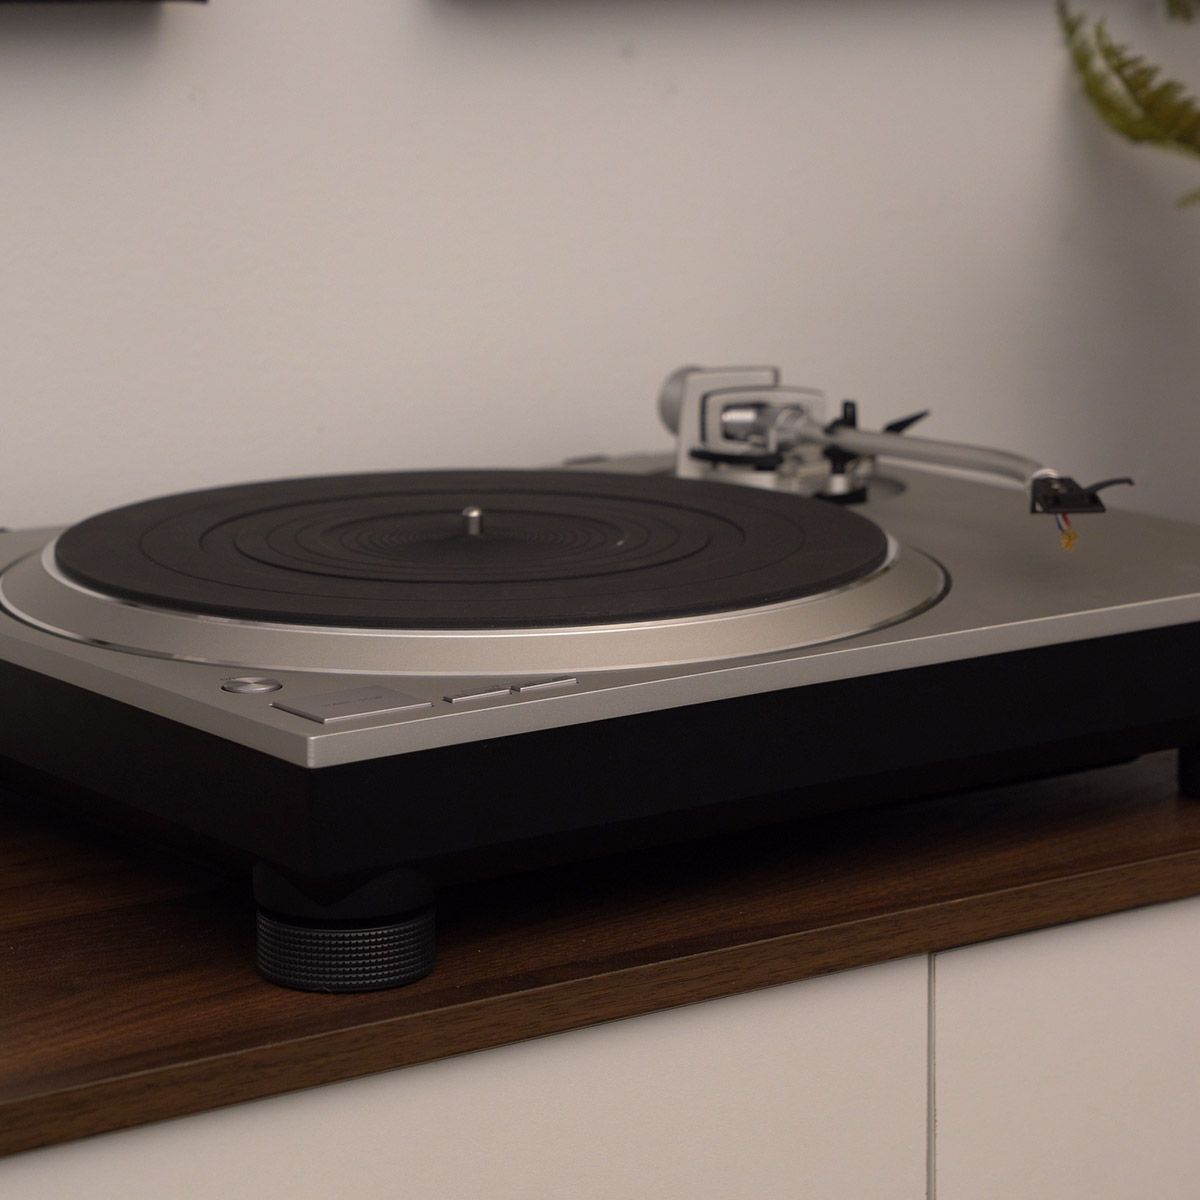 Technics SL-1500C Turntable with Built-in Preamp & Cartridge